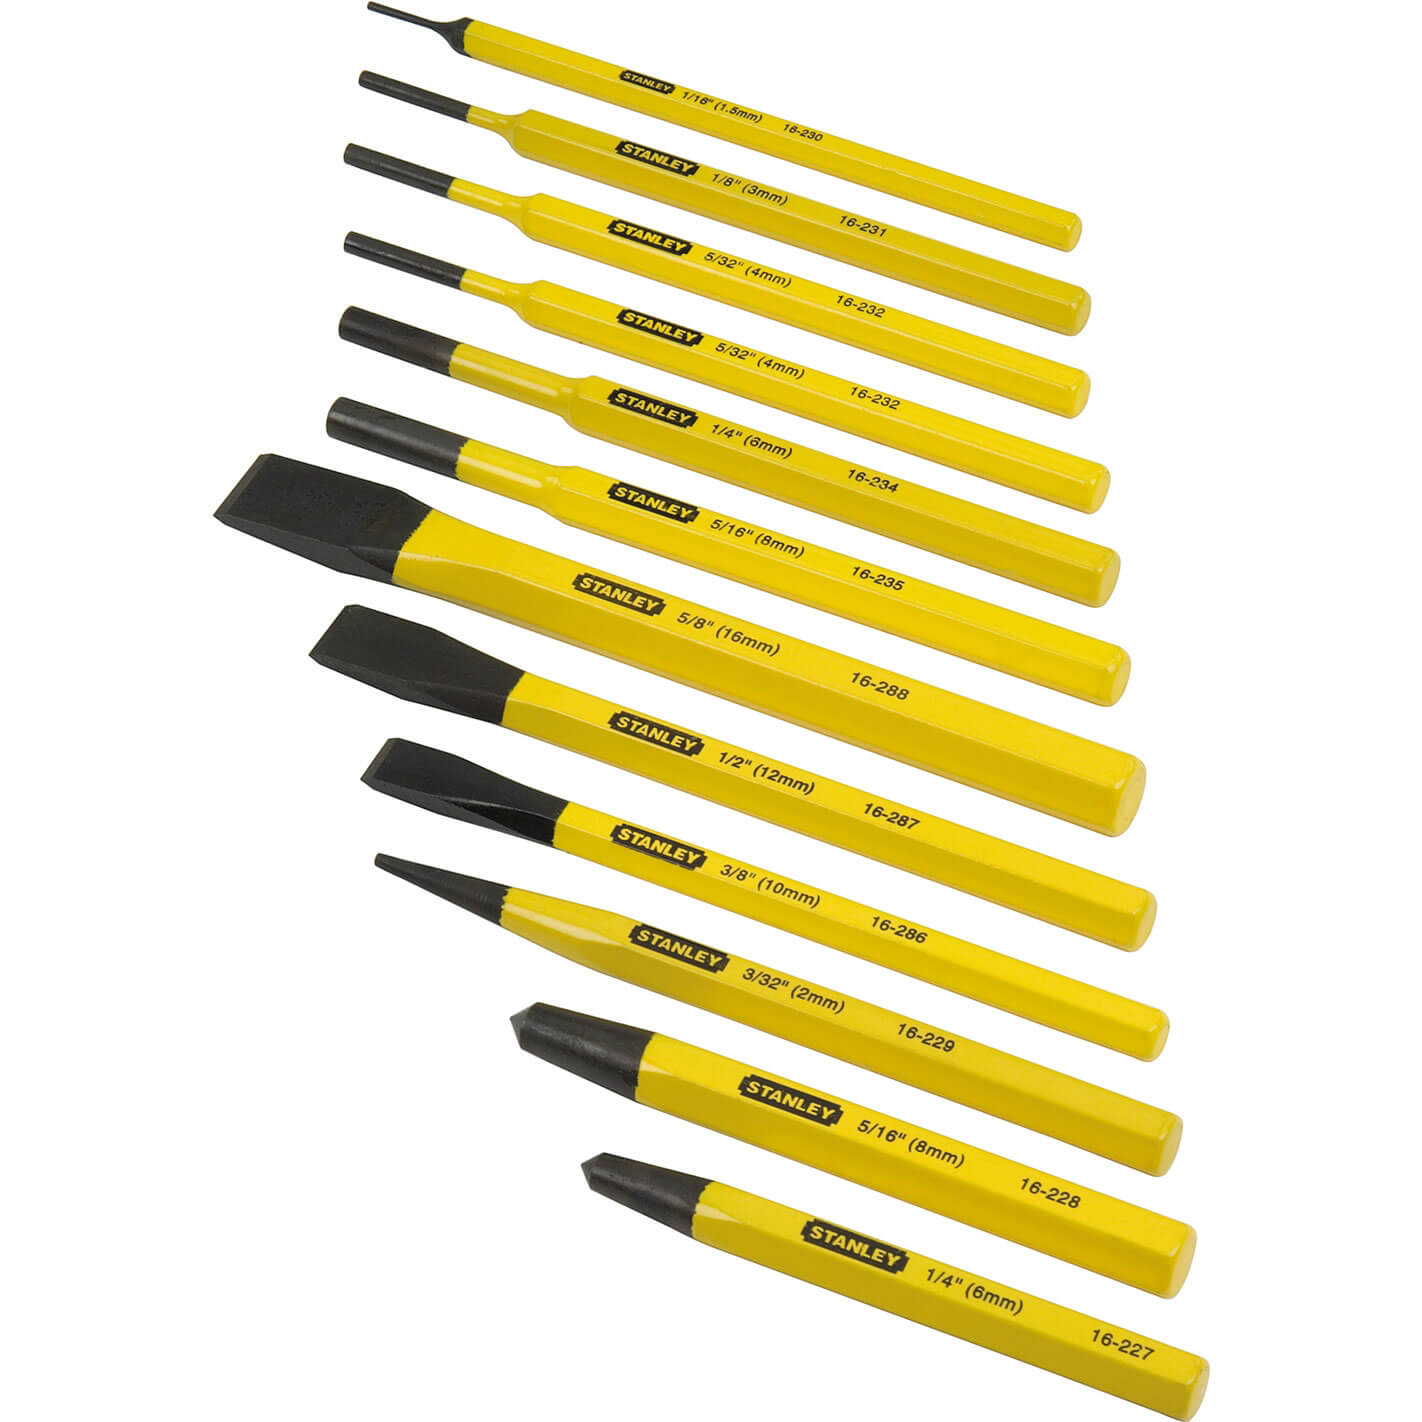 Photo of Stanley 12 Piece Punch And Chisel Set